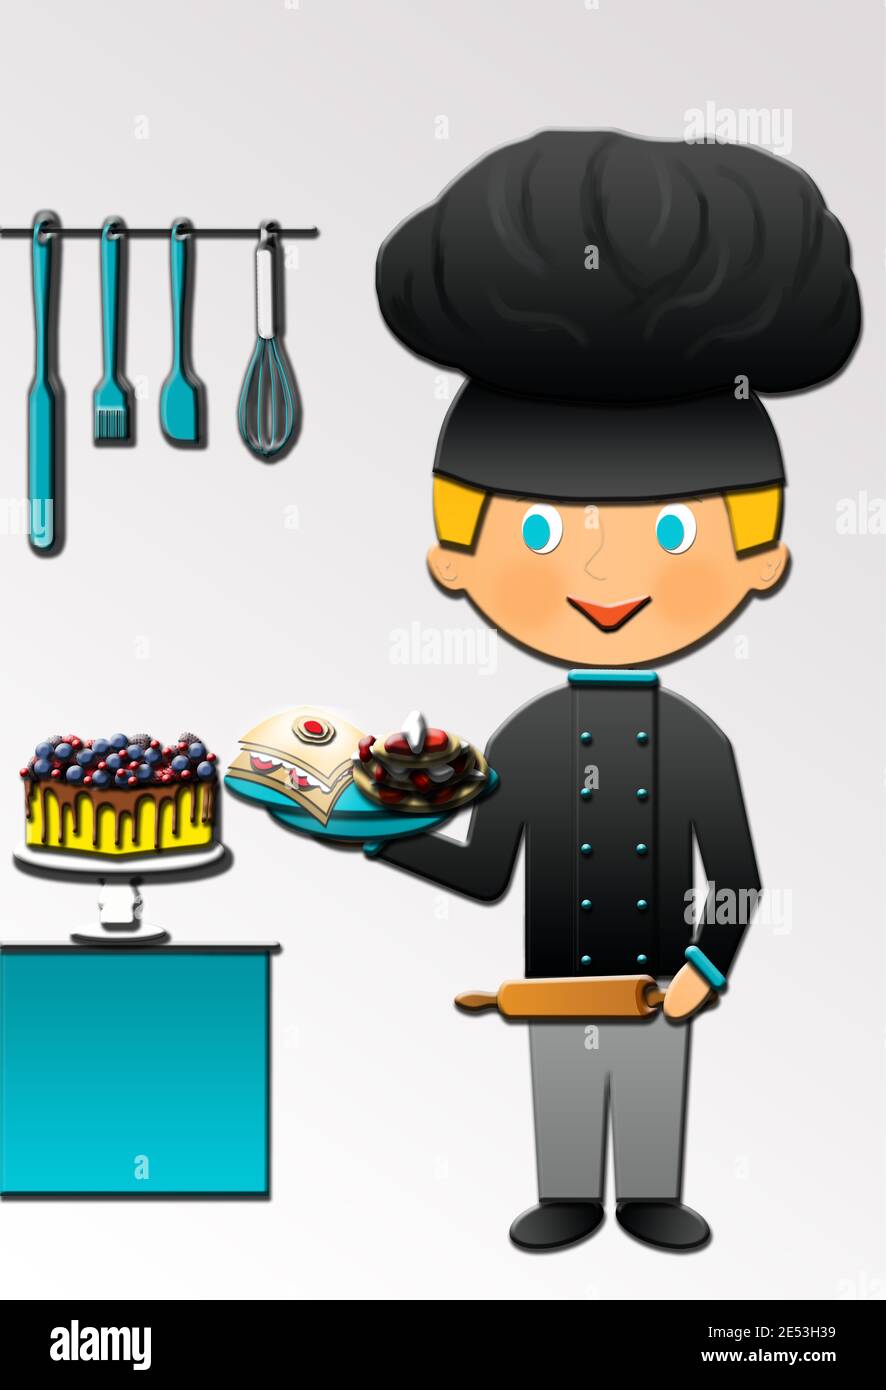 Cartoon of a cute Happy Pastry Chef, in a Chef uniform, with some kitchen  tools. This illustration is part of a collection of different professions  Stock Photo - Alamy